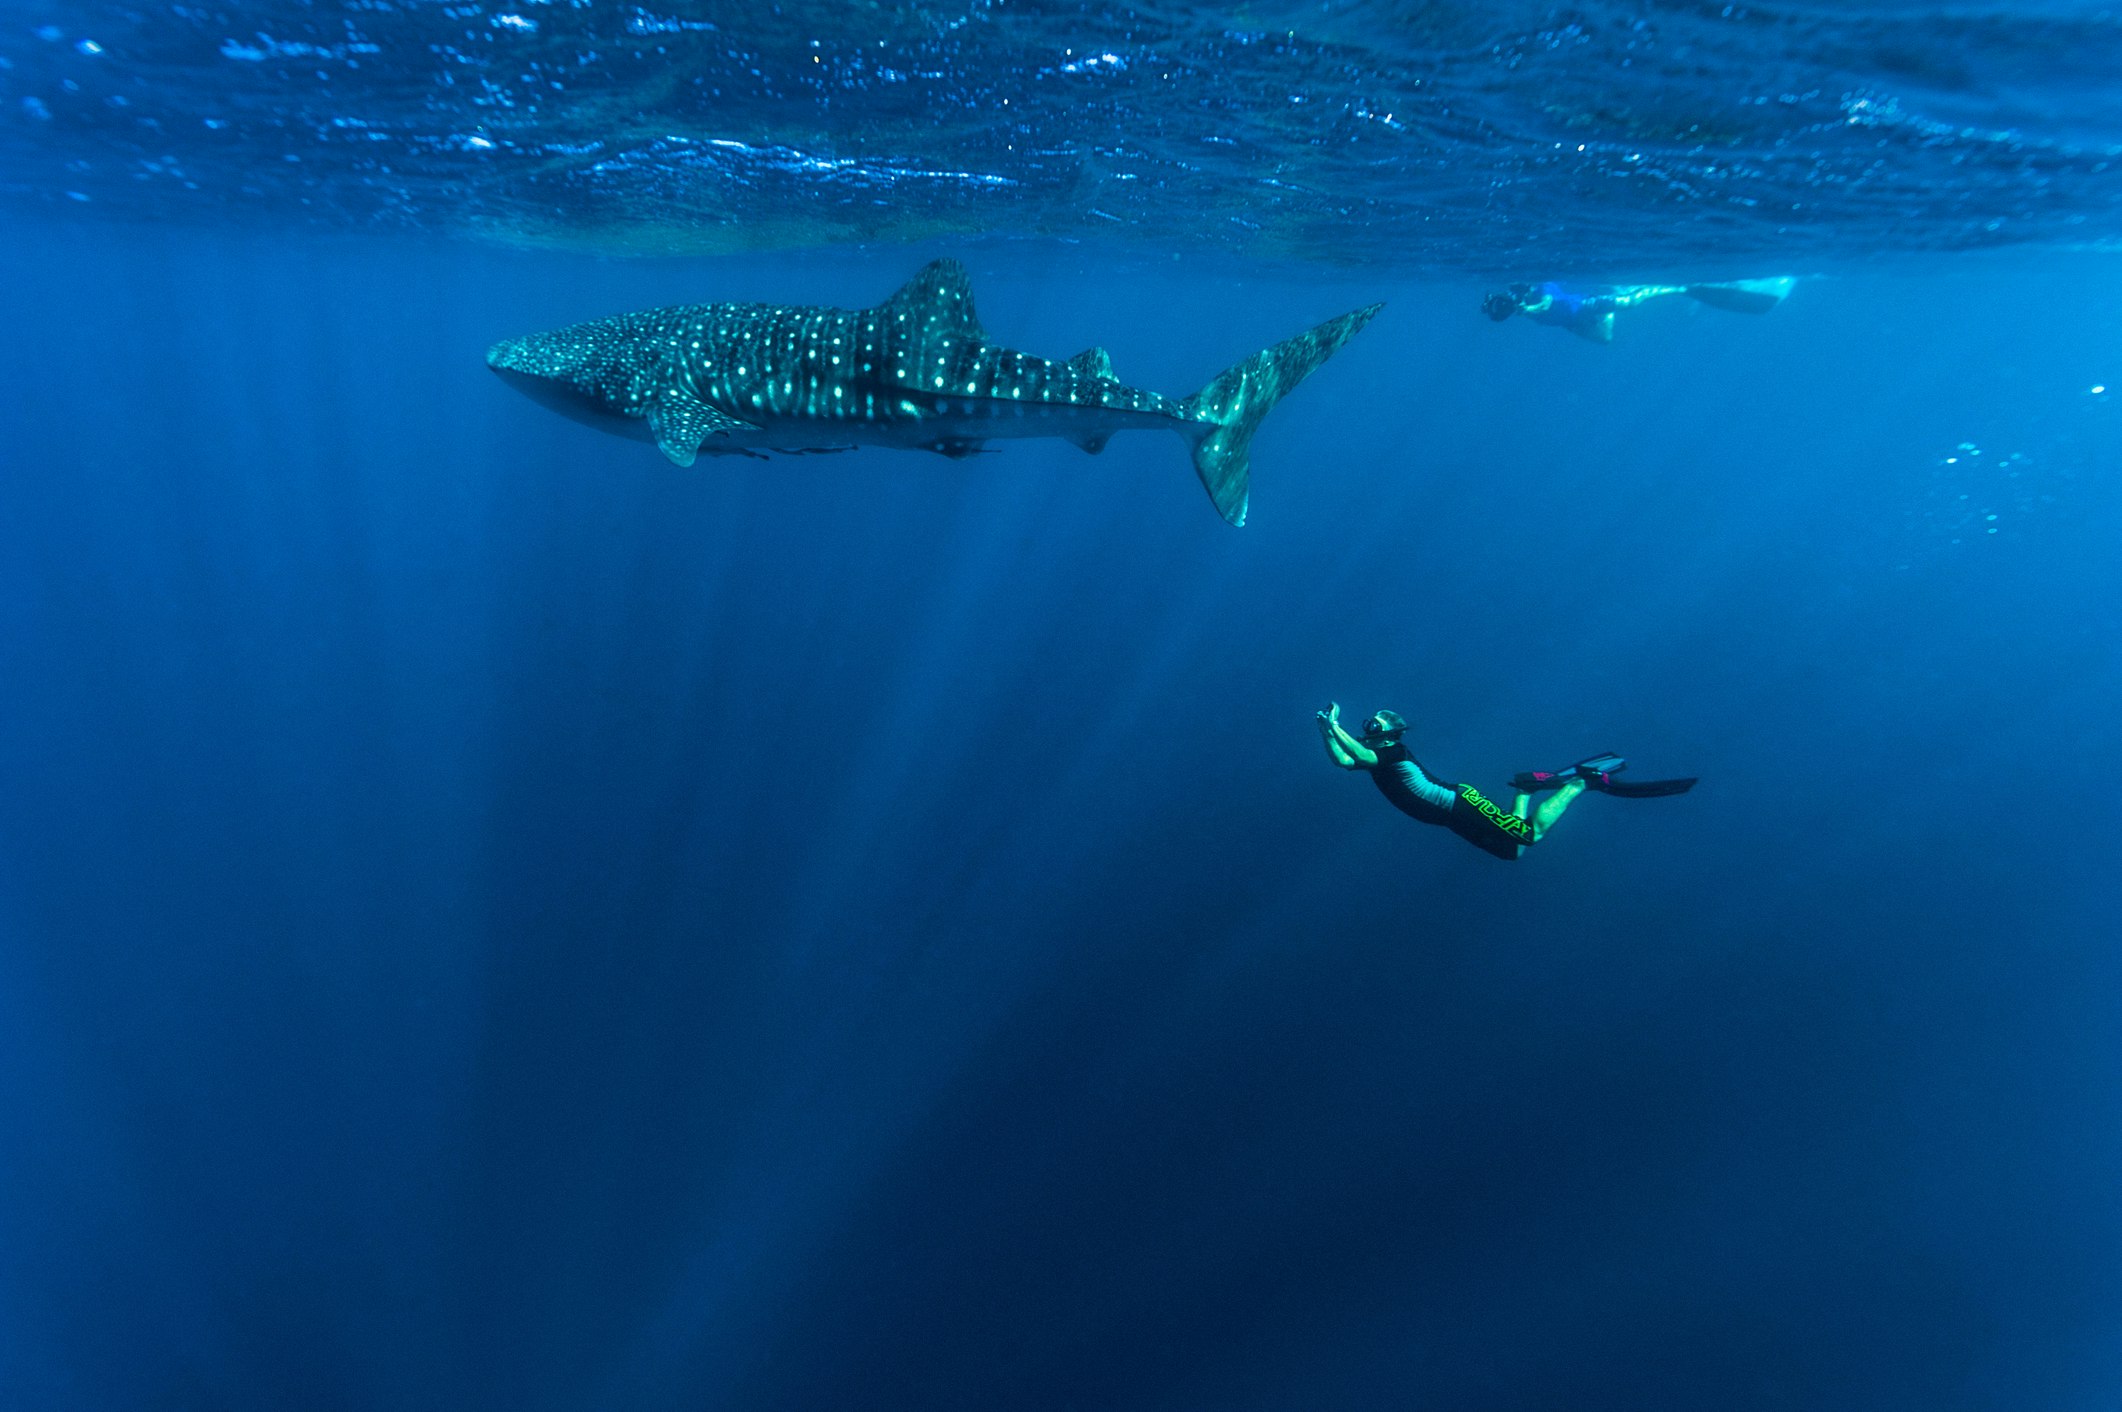 A scientist photographs a whale shark for marine research in Ningaloo Reef, Australia